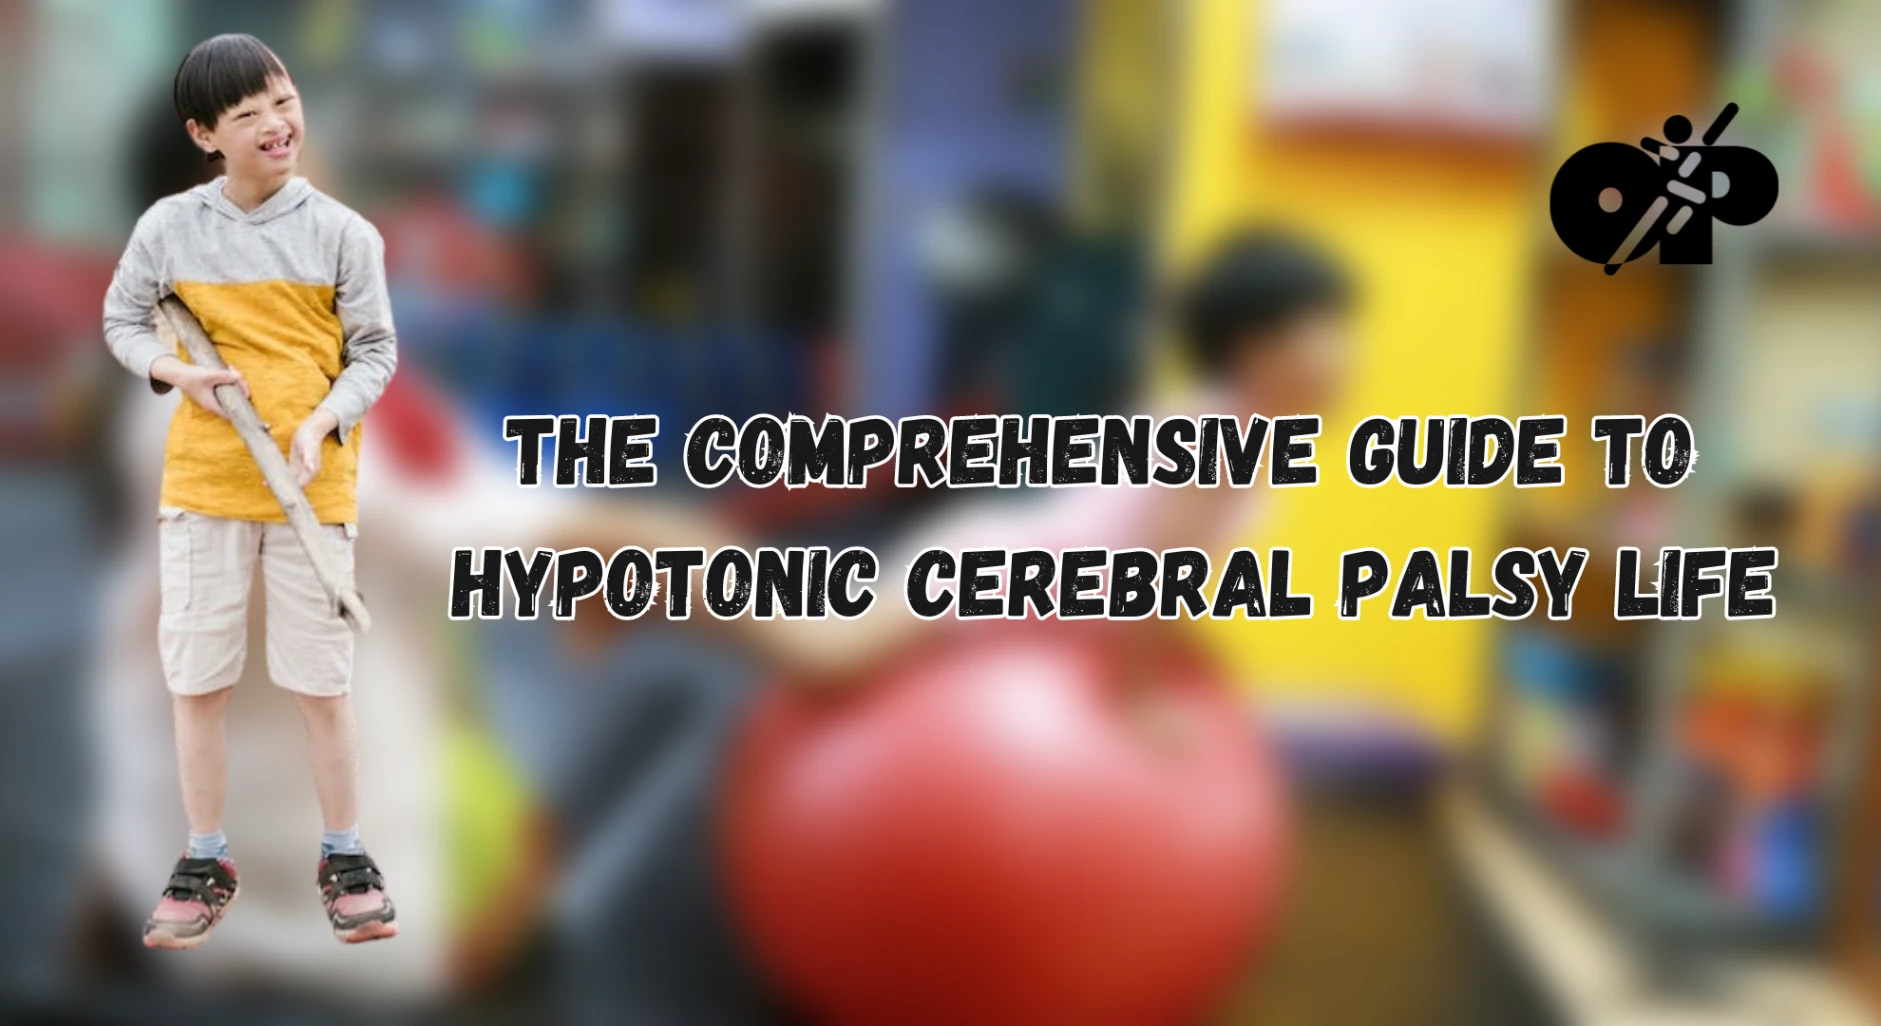 35. The Comprehensive Guide to Hypotonic Cerebral Palsy Life